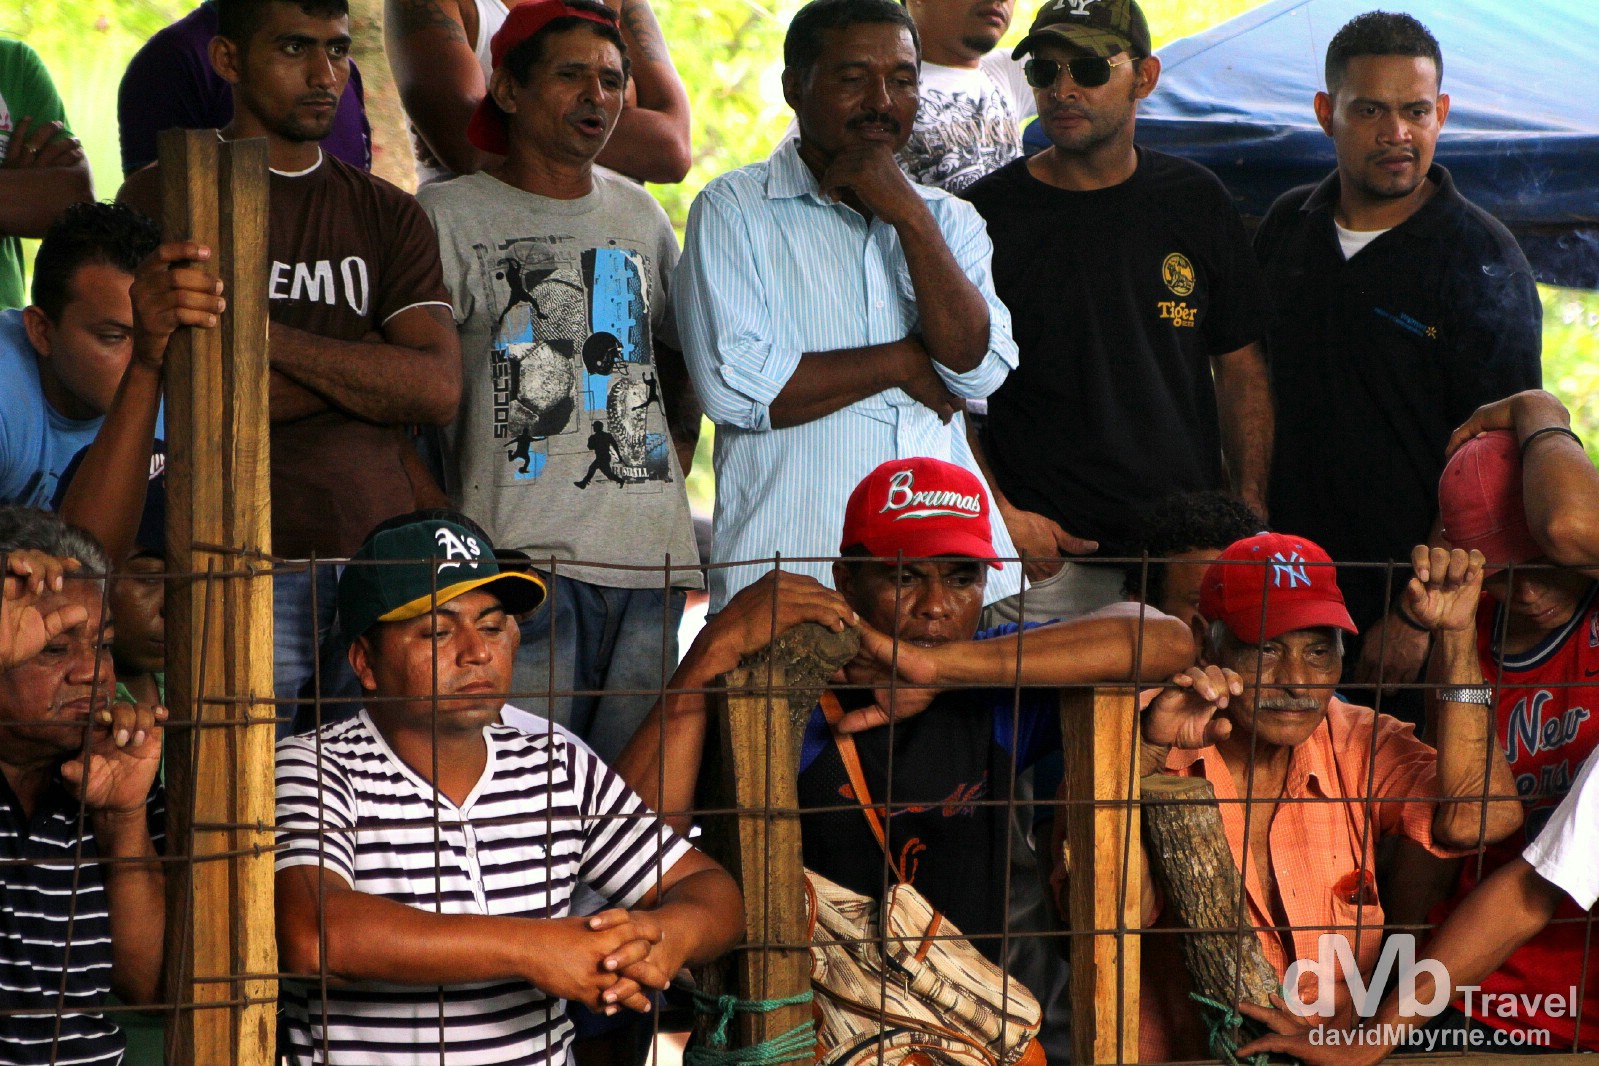 Spectators at a cock fighting bout in Leon, Nicaragua. June 16th 2013.